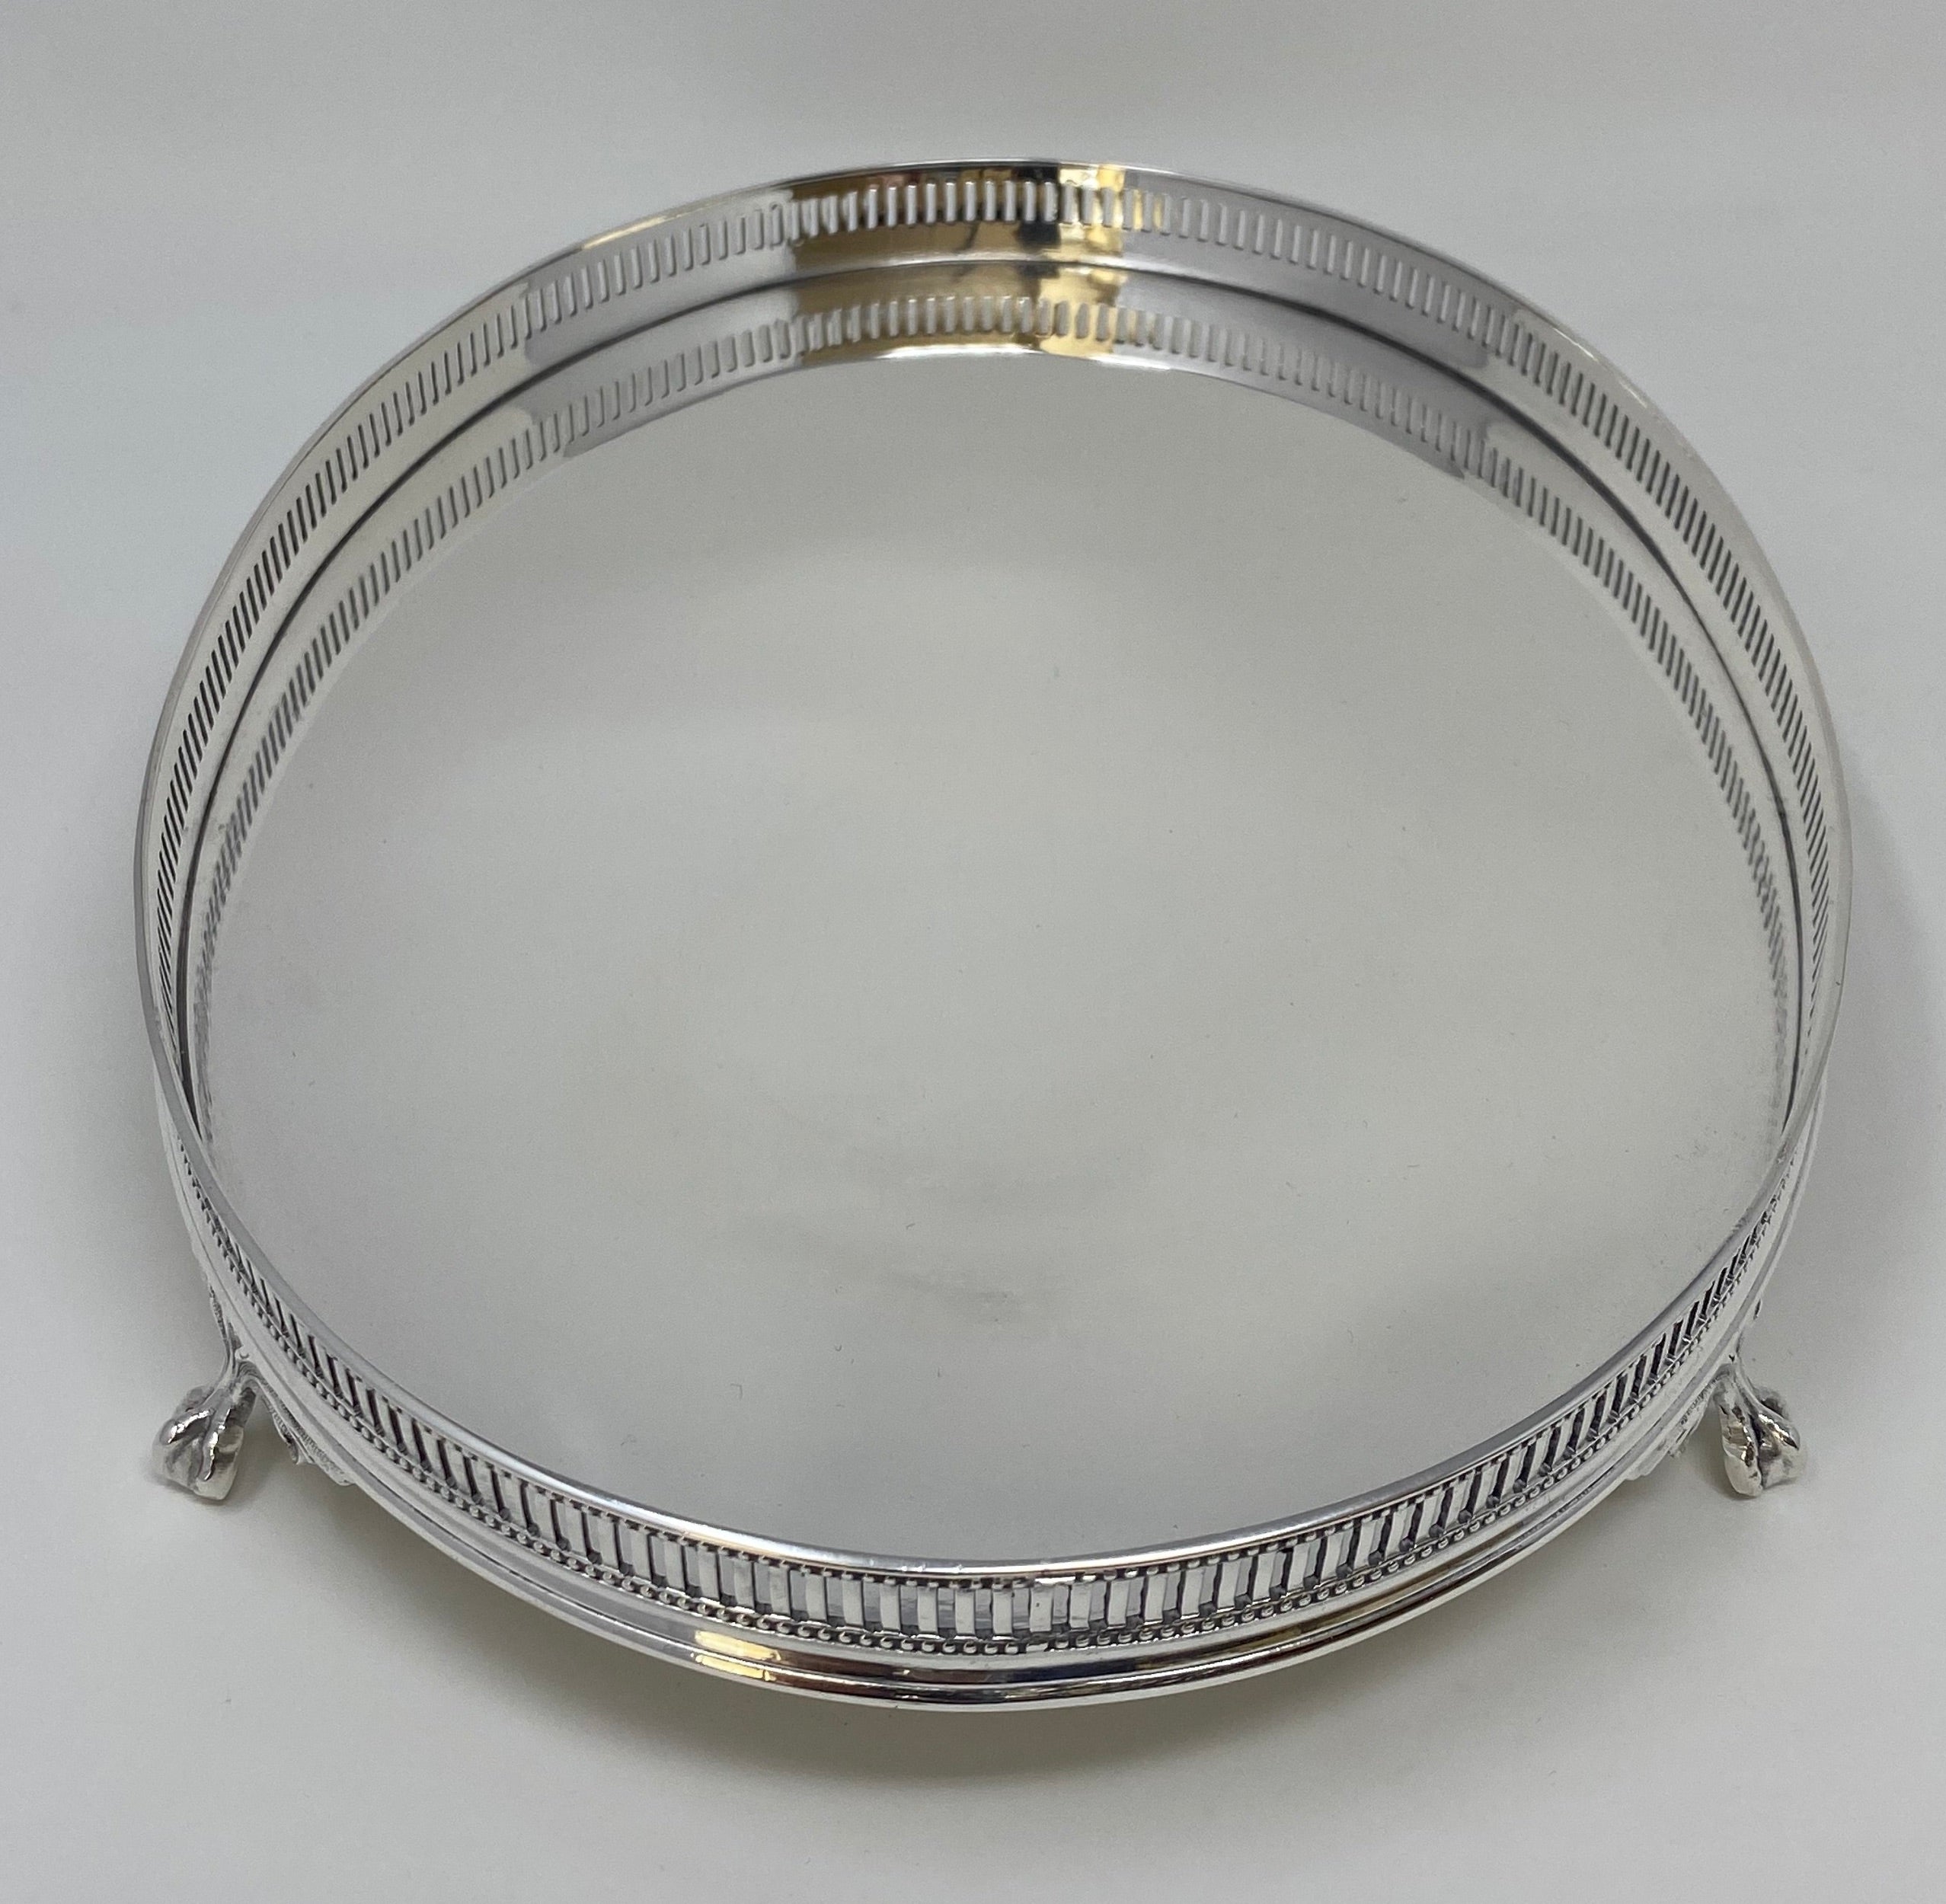 Antique Silver Plated Gallery Salver